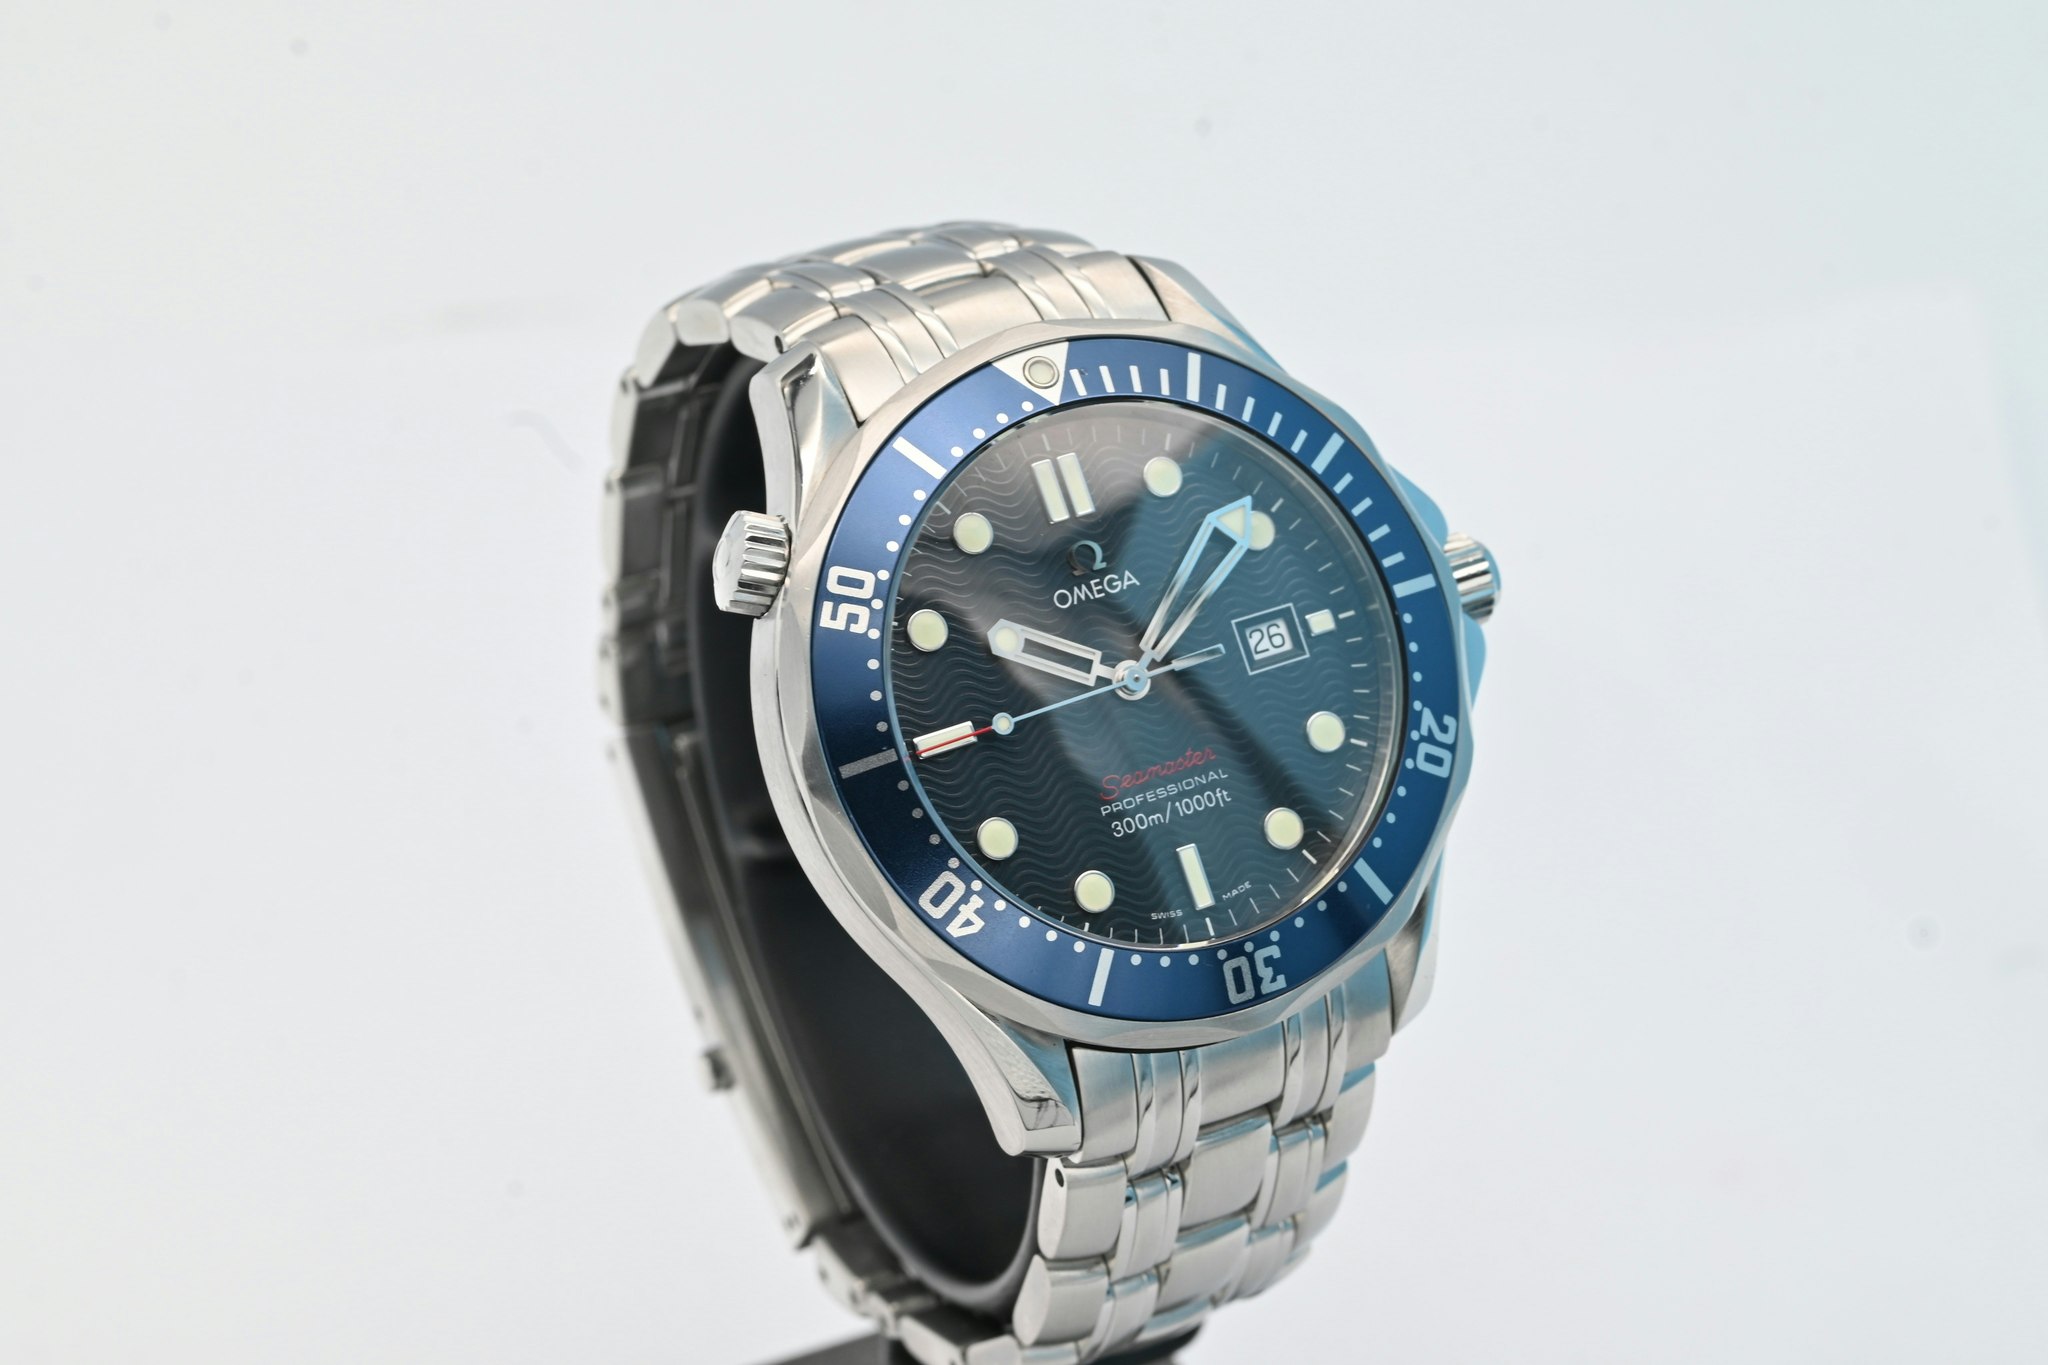 SOLD Omega Seamaster Diver 300 M ref: 2221.80 - Top Condition - 706